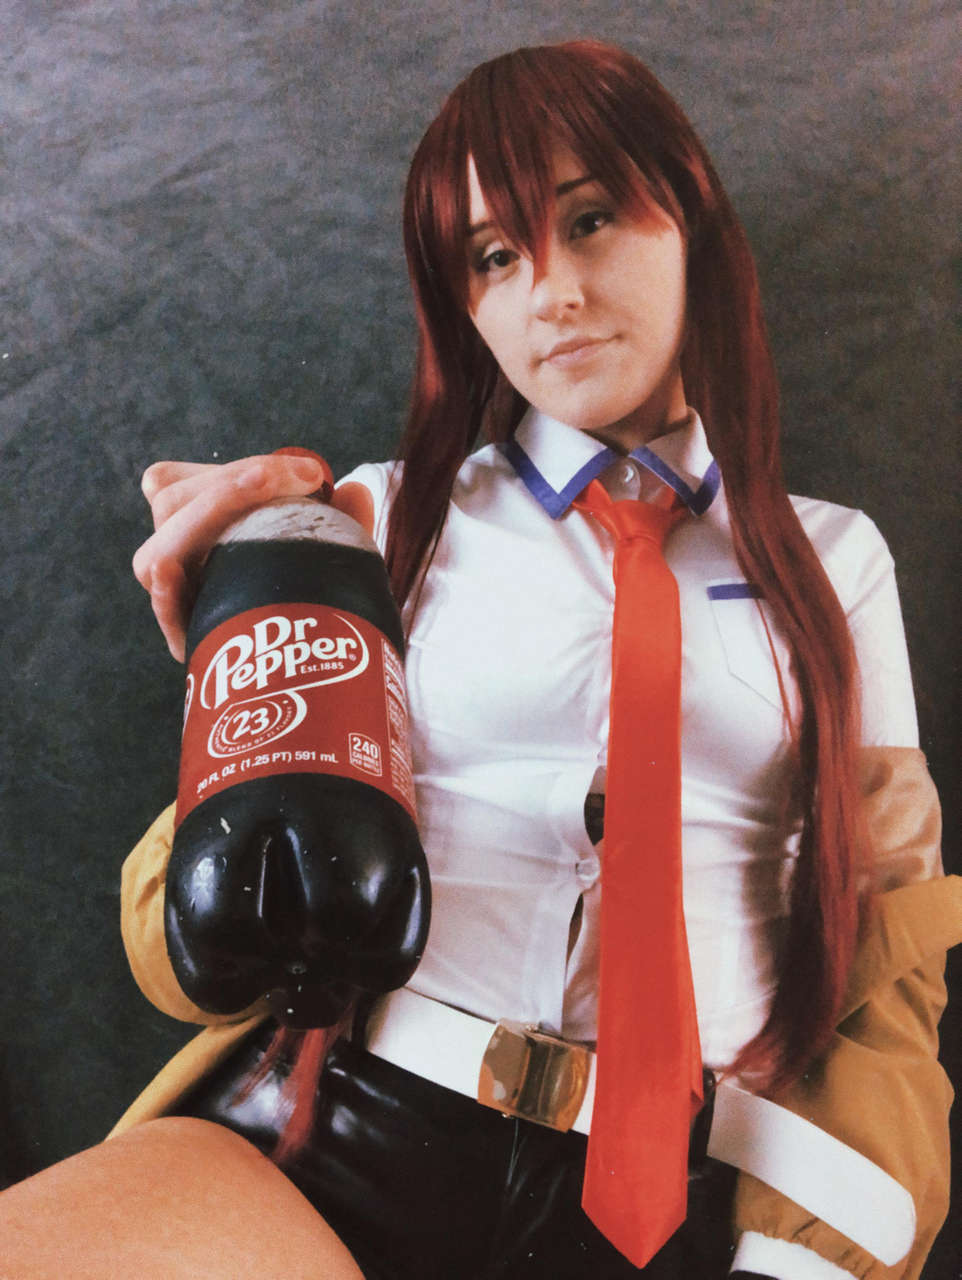 Makise Kurisu Offers You Some Of The Intellectual Drink Of The Chosen One